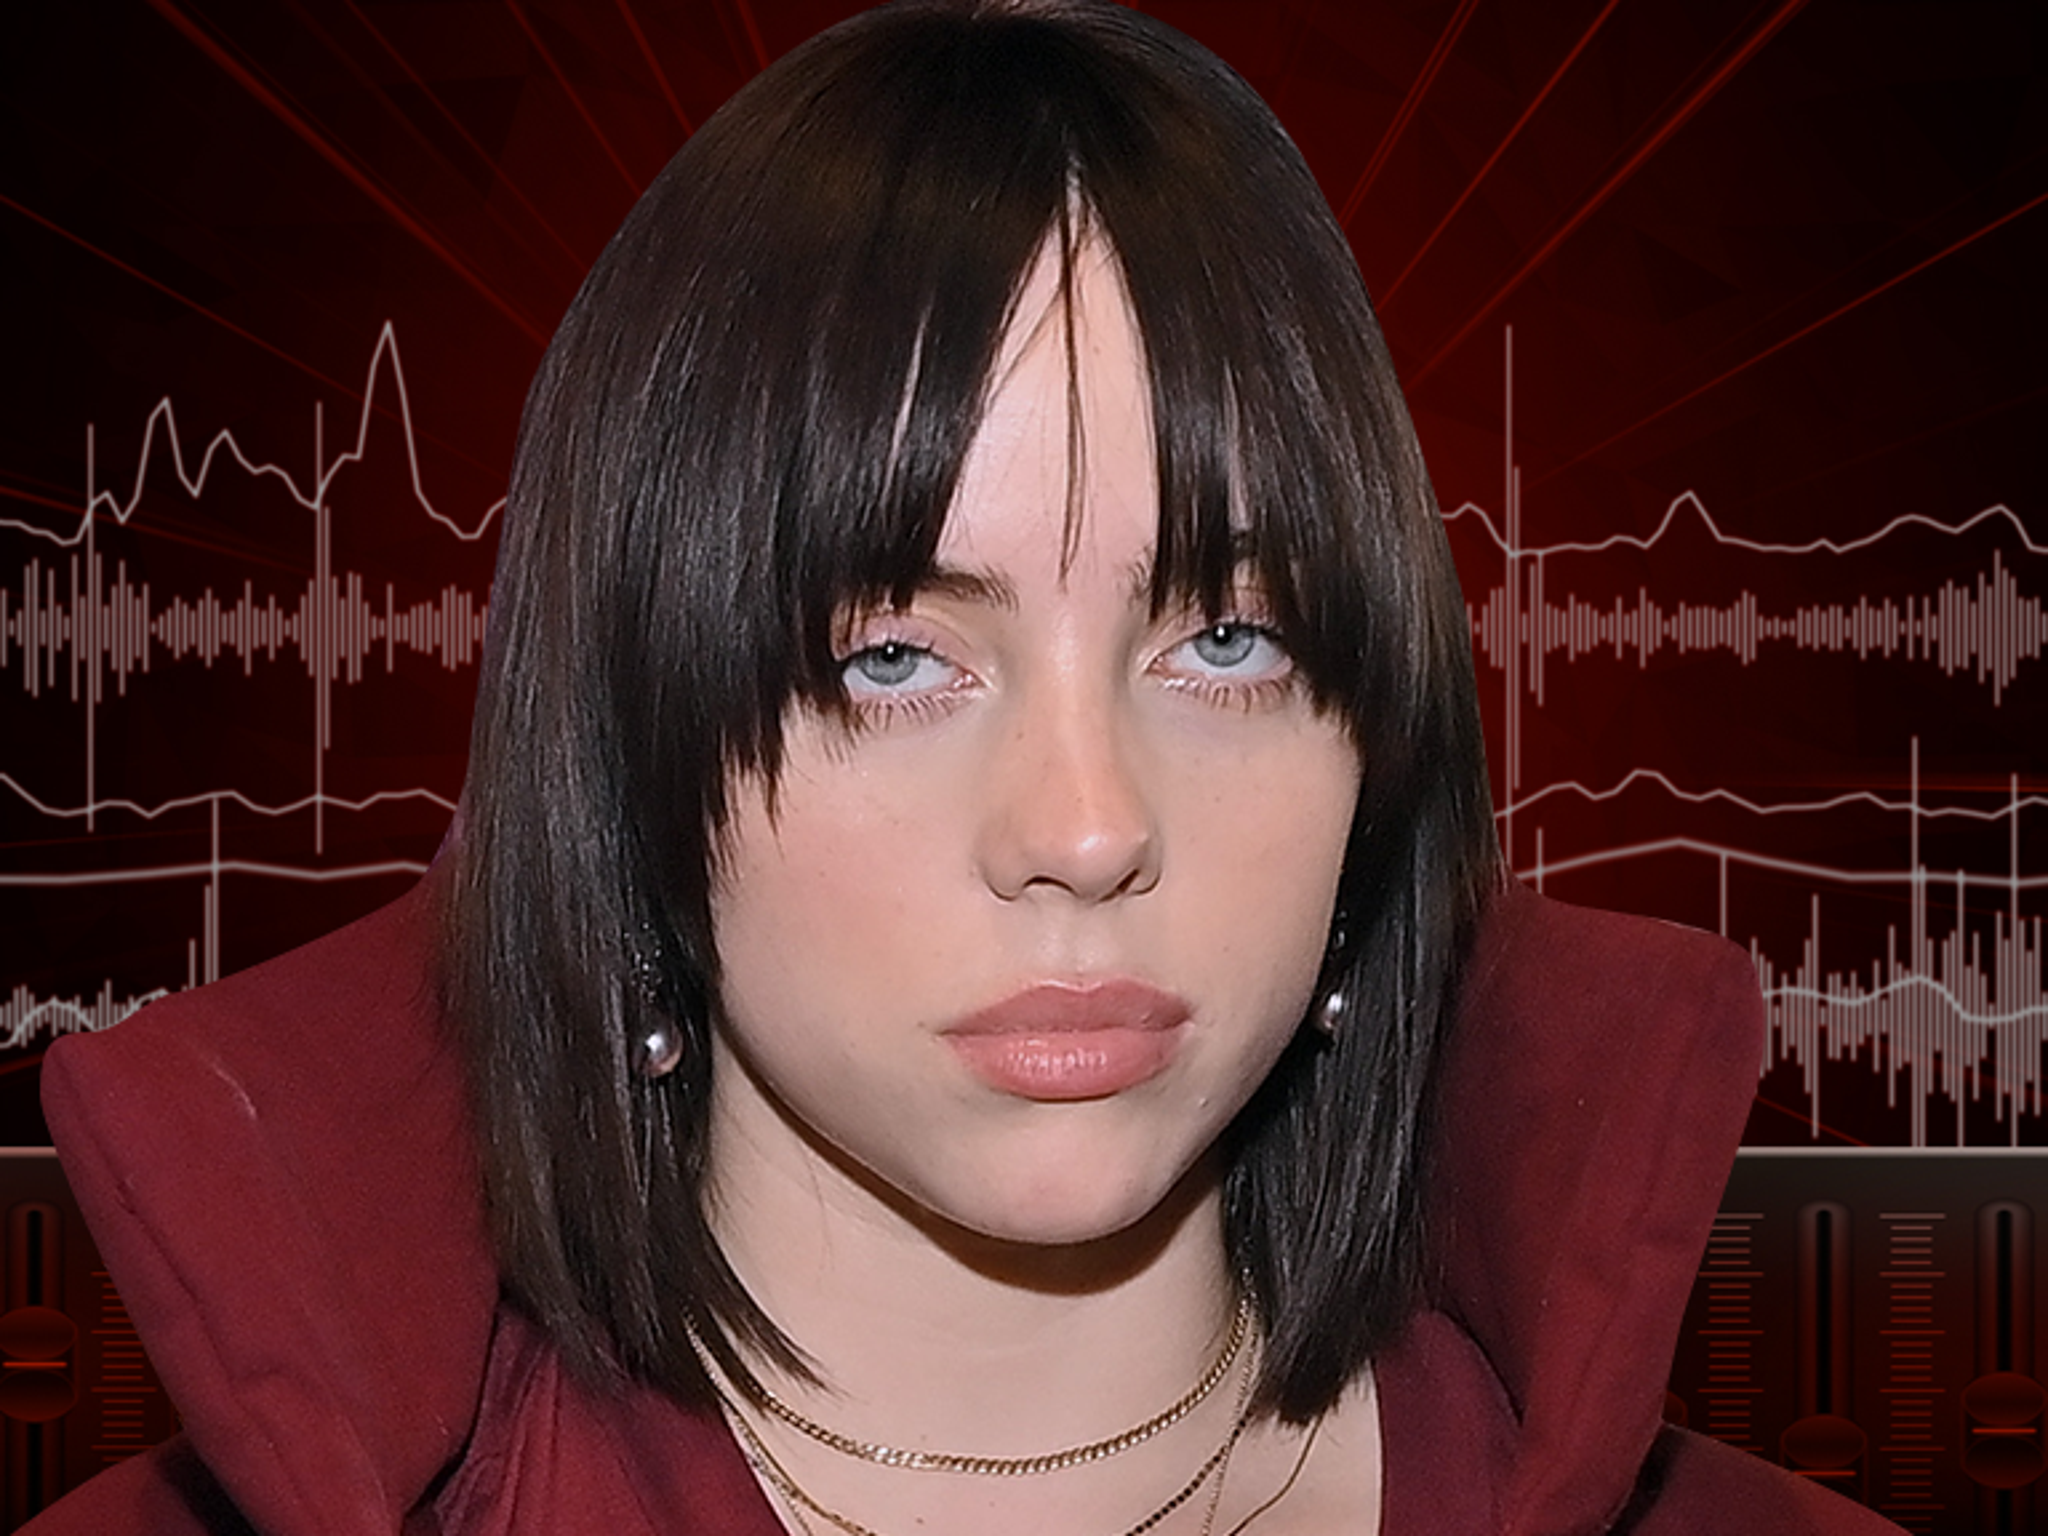 19 Yeah Sex Video Download - Billie Eilish Says She Started Watching Porn at 11, Calls it 'Disgrace'